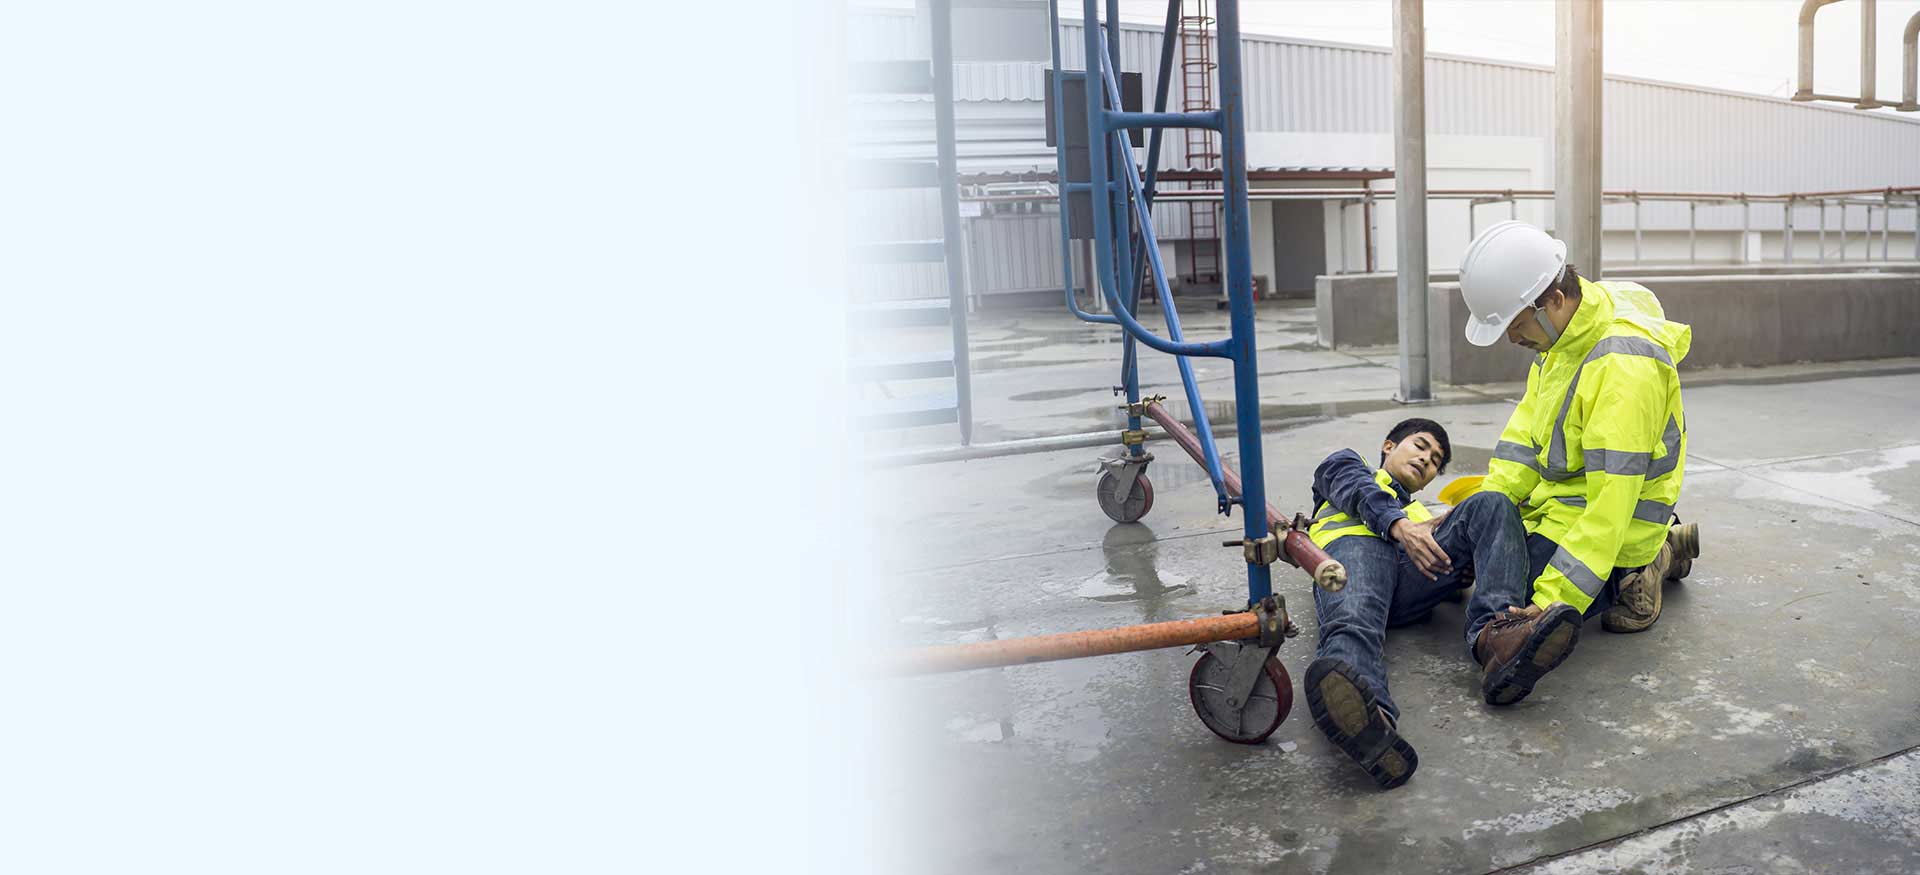 fall scaffolding to the floor, Safety team help employee accident.